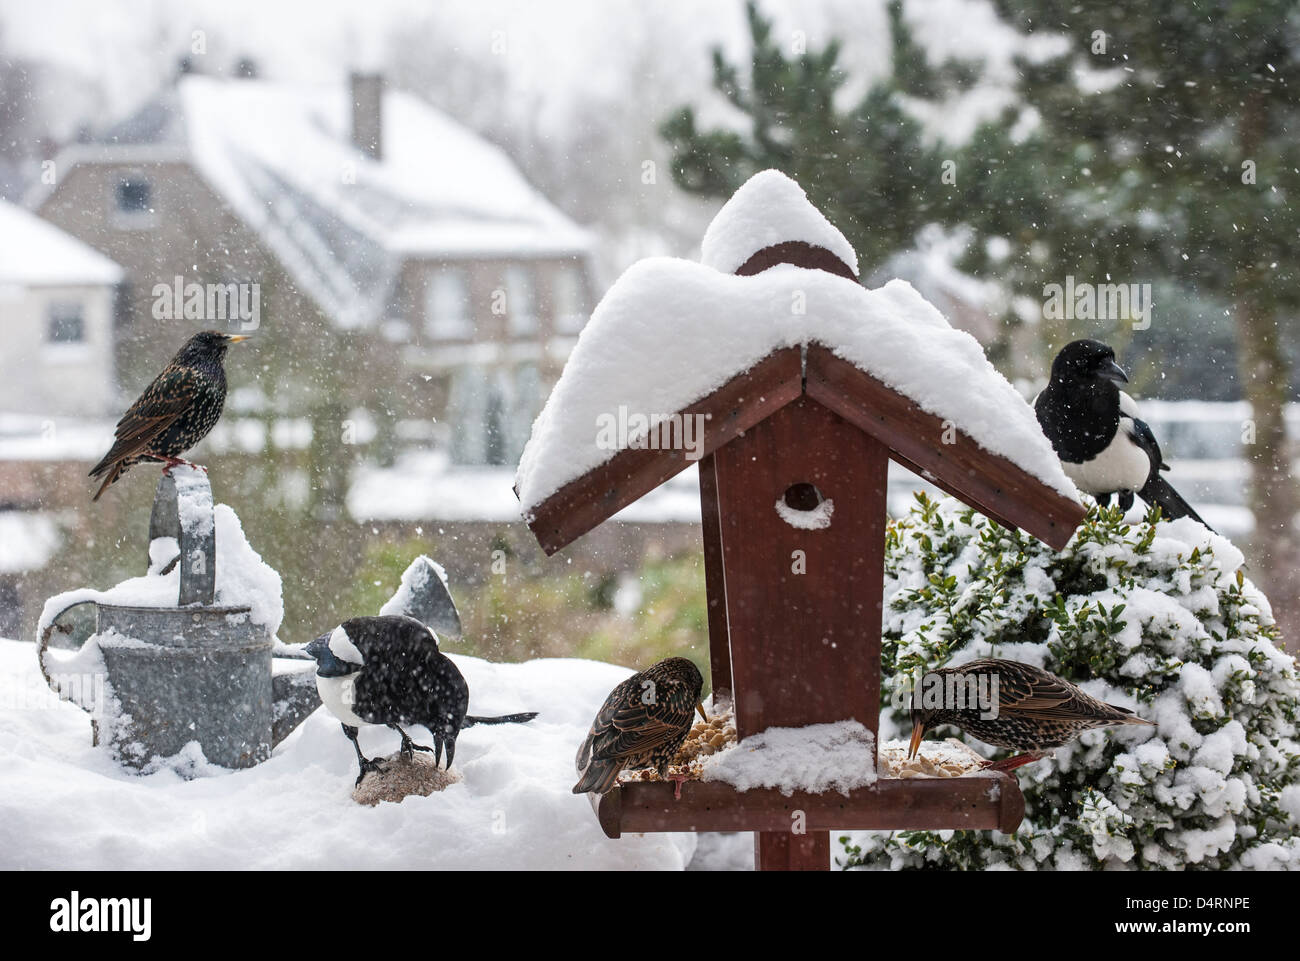 Common Starlings (Sturnus vulgaris) and European Magpies (Pica pica) at bird feeder during in garden in the snow in winter Stock Photo